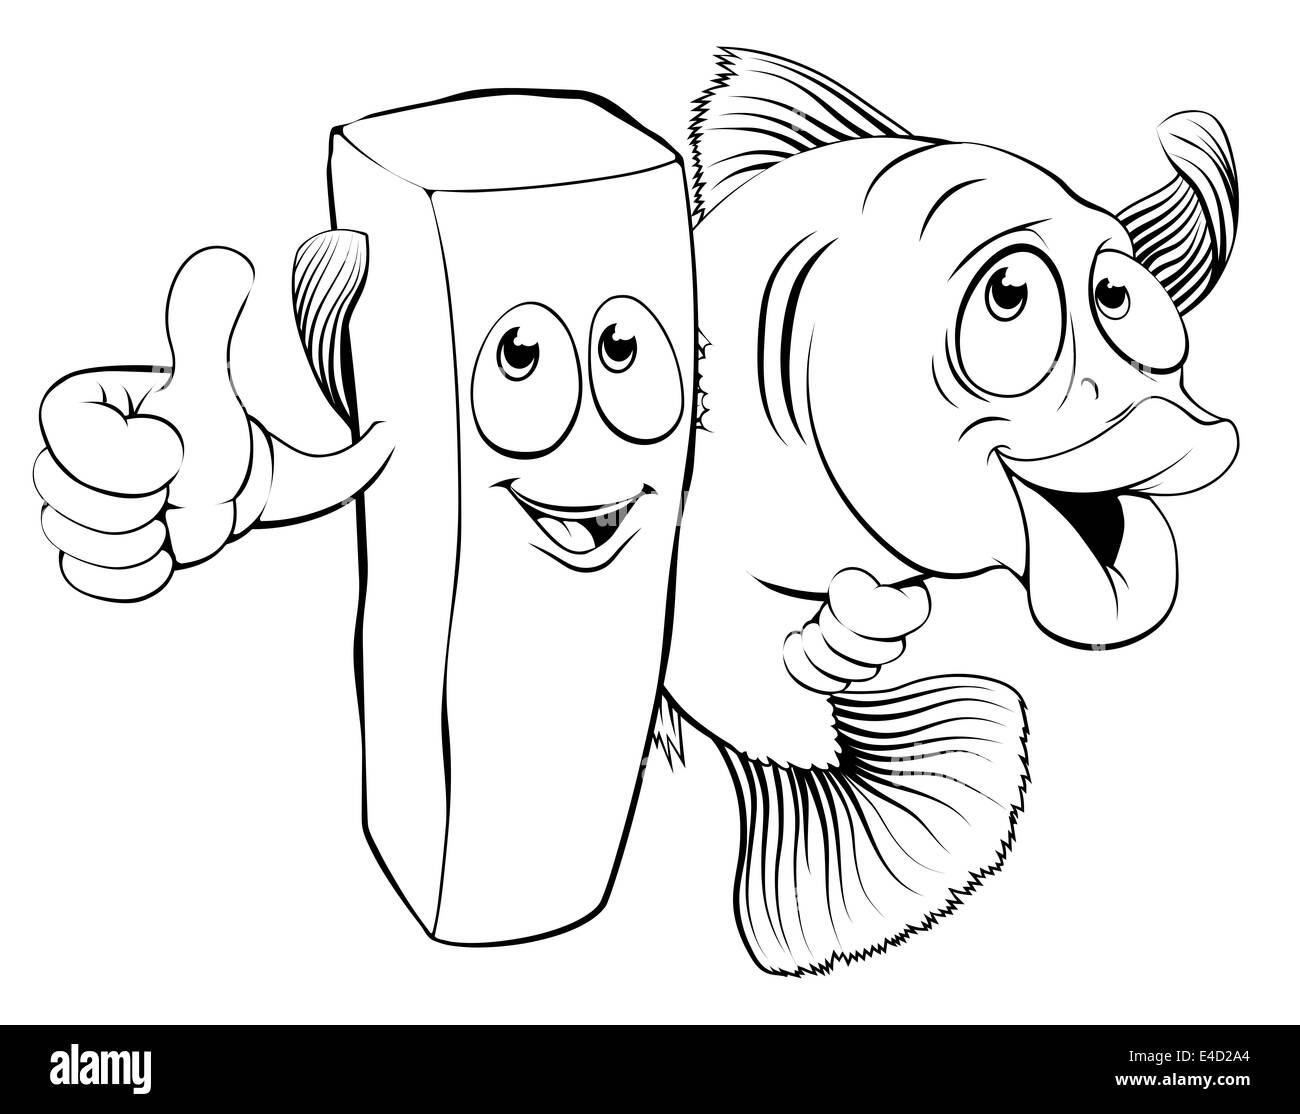 An illustration of fish and chips mascot characters arm in arm giving thumbs up Stock Photo